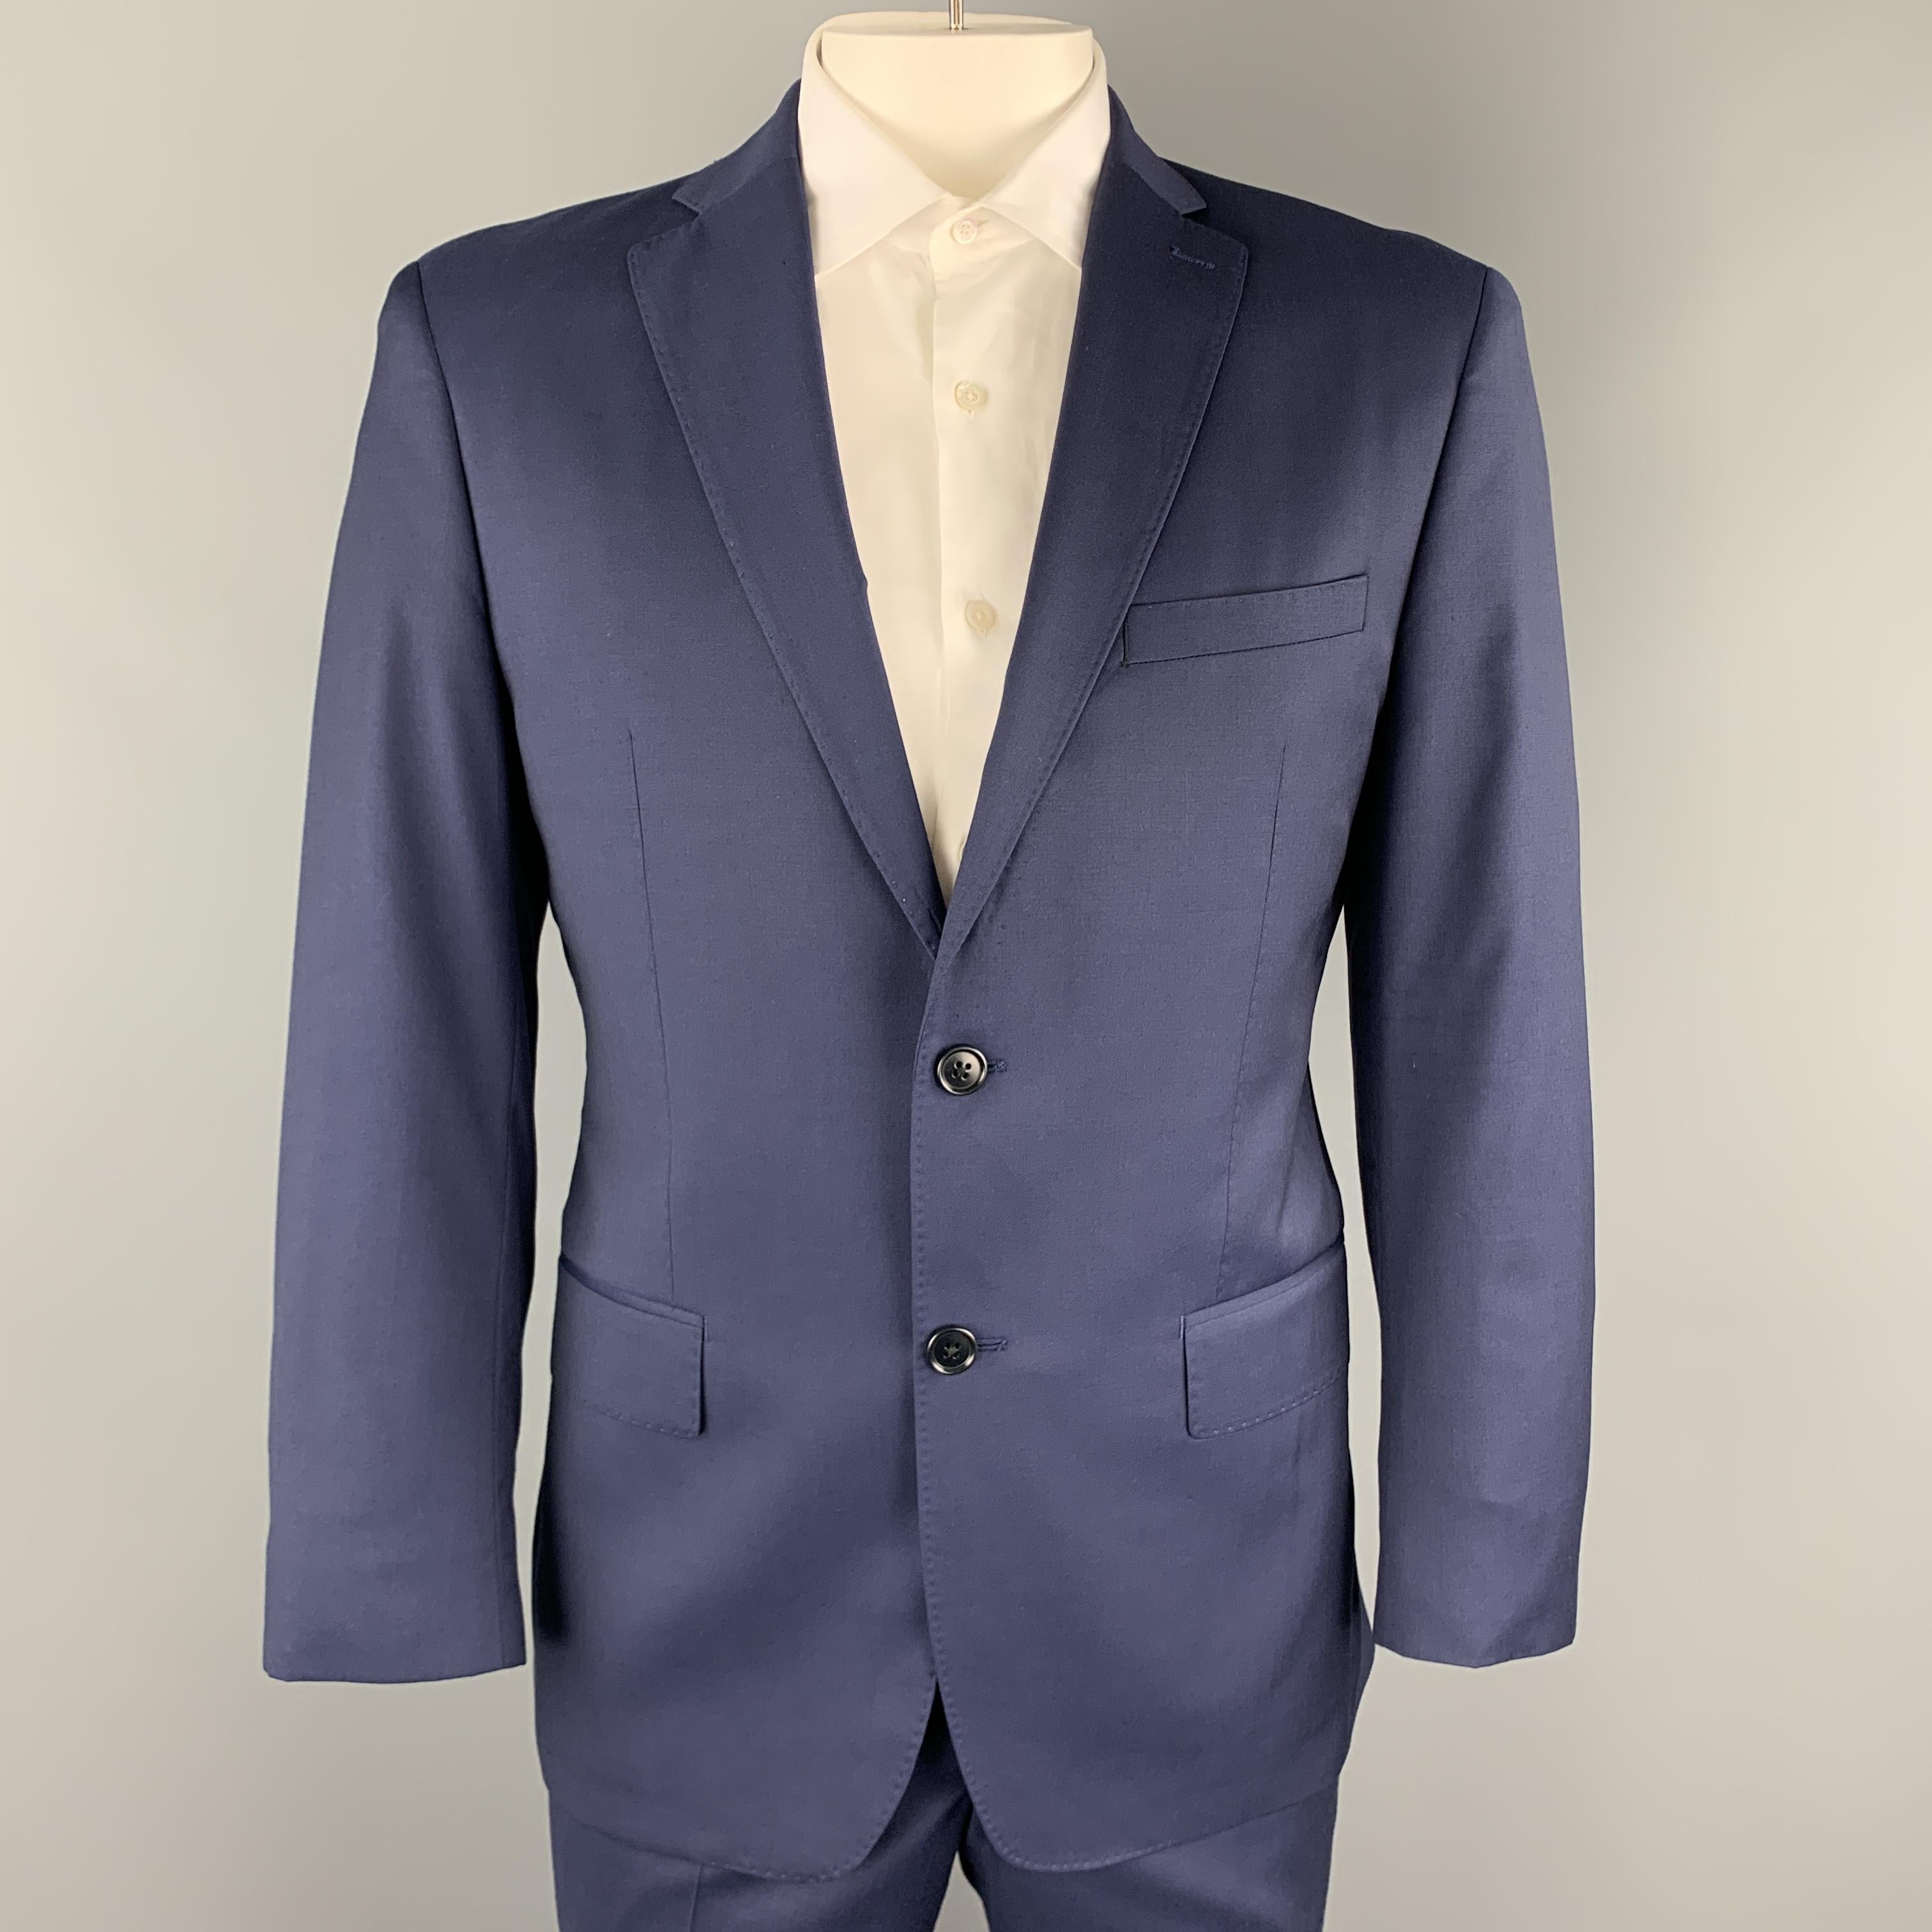 JOHN VARVATOS USA suit comes in navy blue wool and includes a single breasted, two button sport coat with a top stitch notch lapel and matching flat front trousers. Made in Canada.

Excellent Pre-Owned Condition.
Marked: USA 42